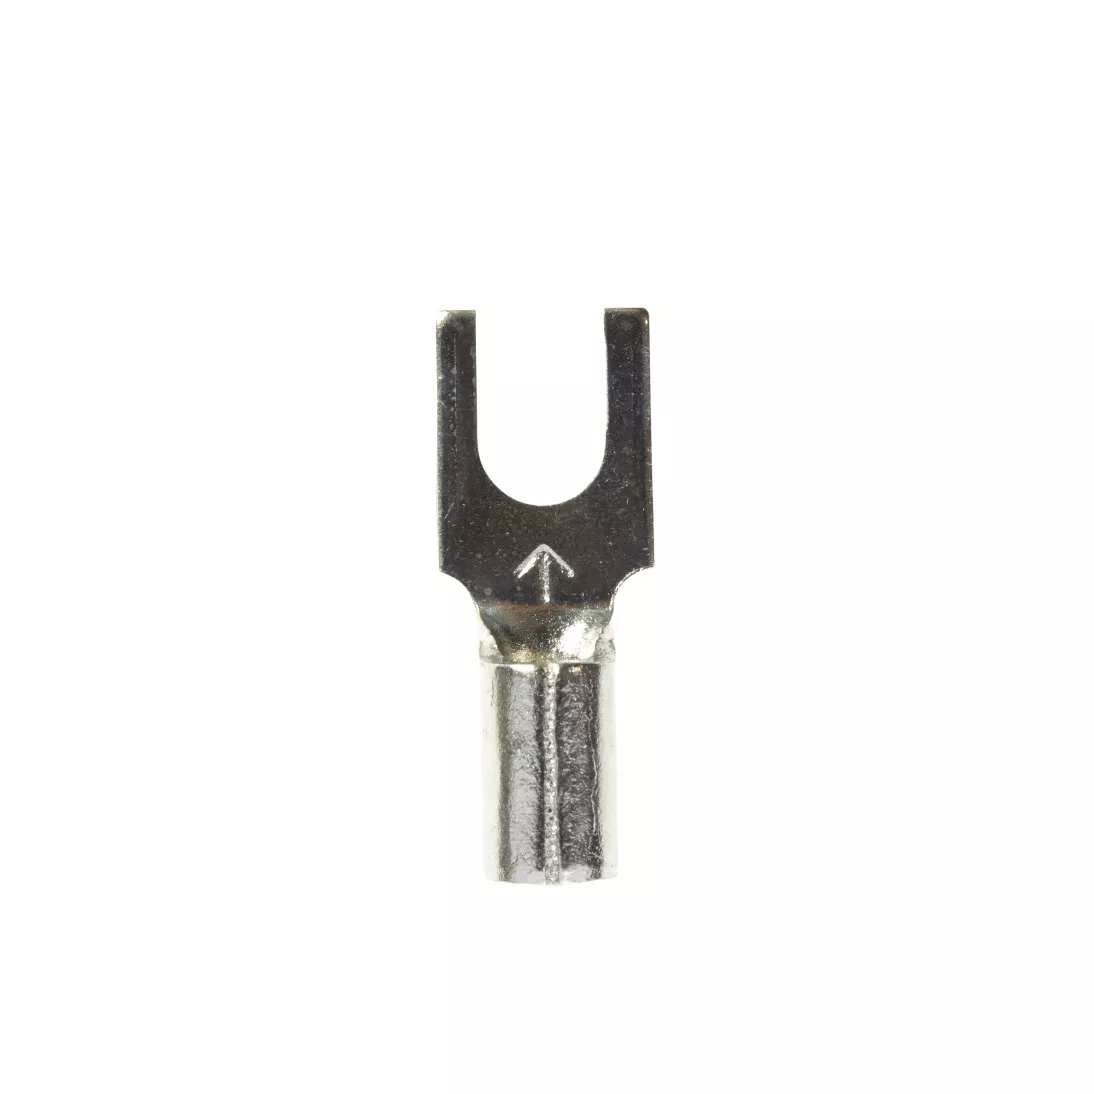 3M™ Scotchlok™ Block Fork Non-Insulated, 100/bottle, M14-6FB/SX,
suitable for use in a terminal block, 500/Case